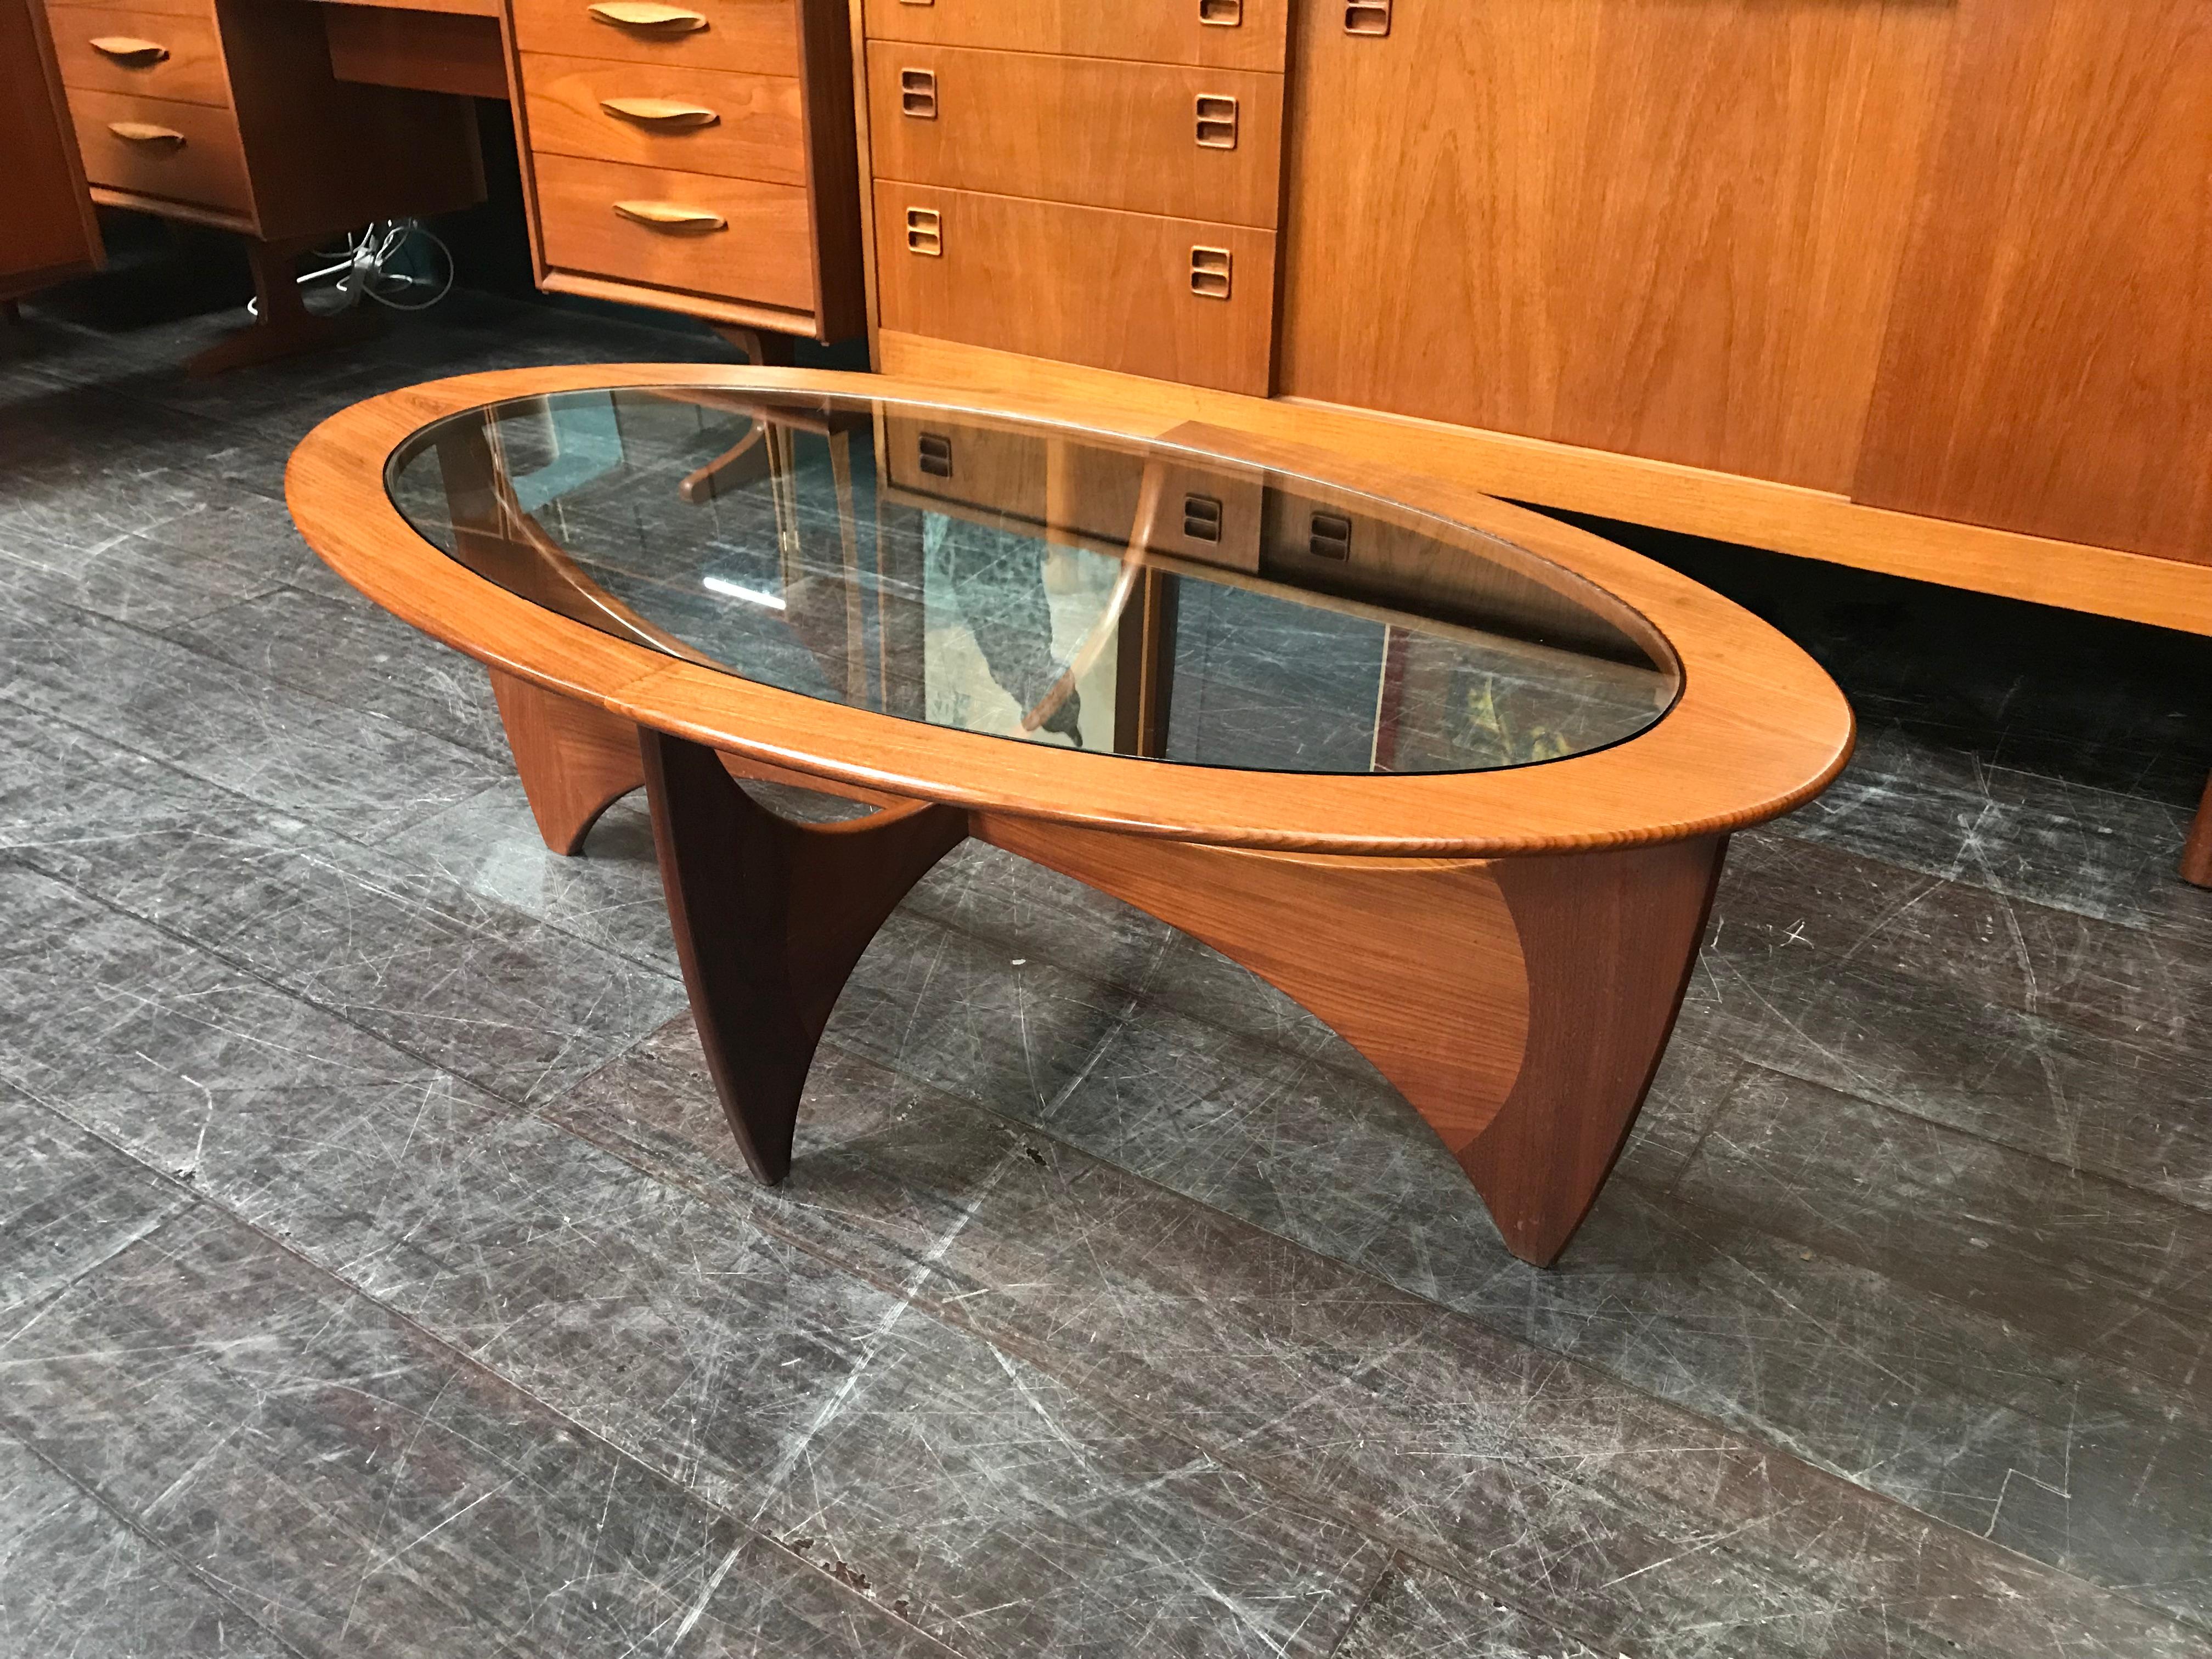 20th Century Oval Astro Midcentury Teak and Glass Coffee Table by Vb Wilkins for G-Plan